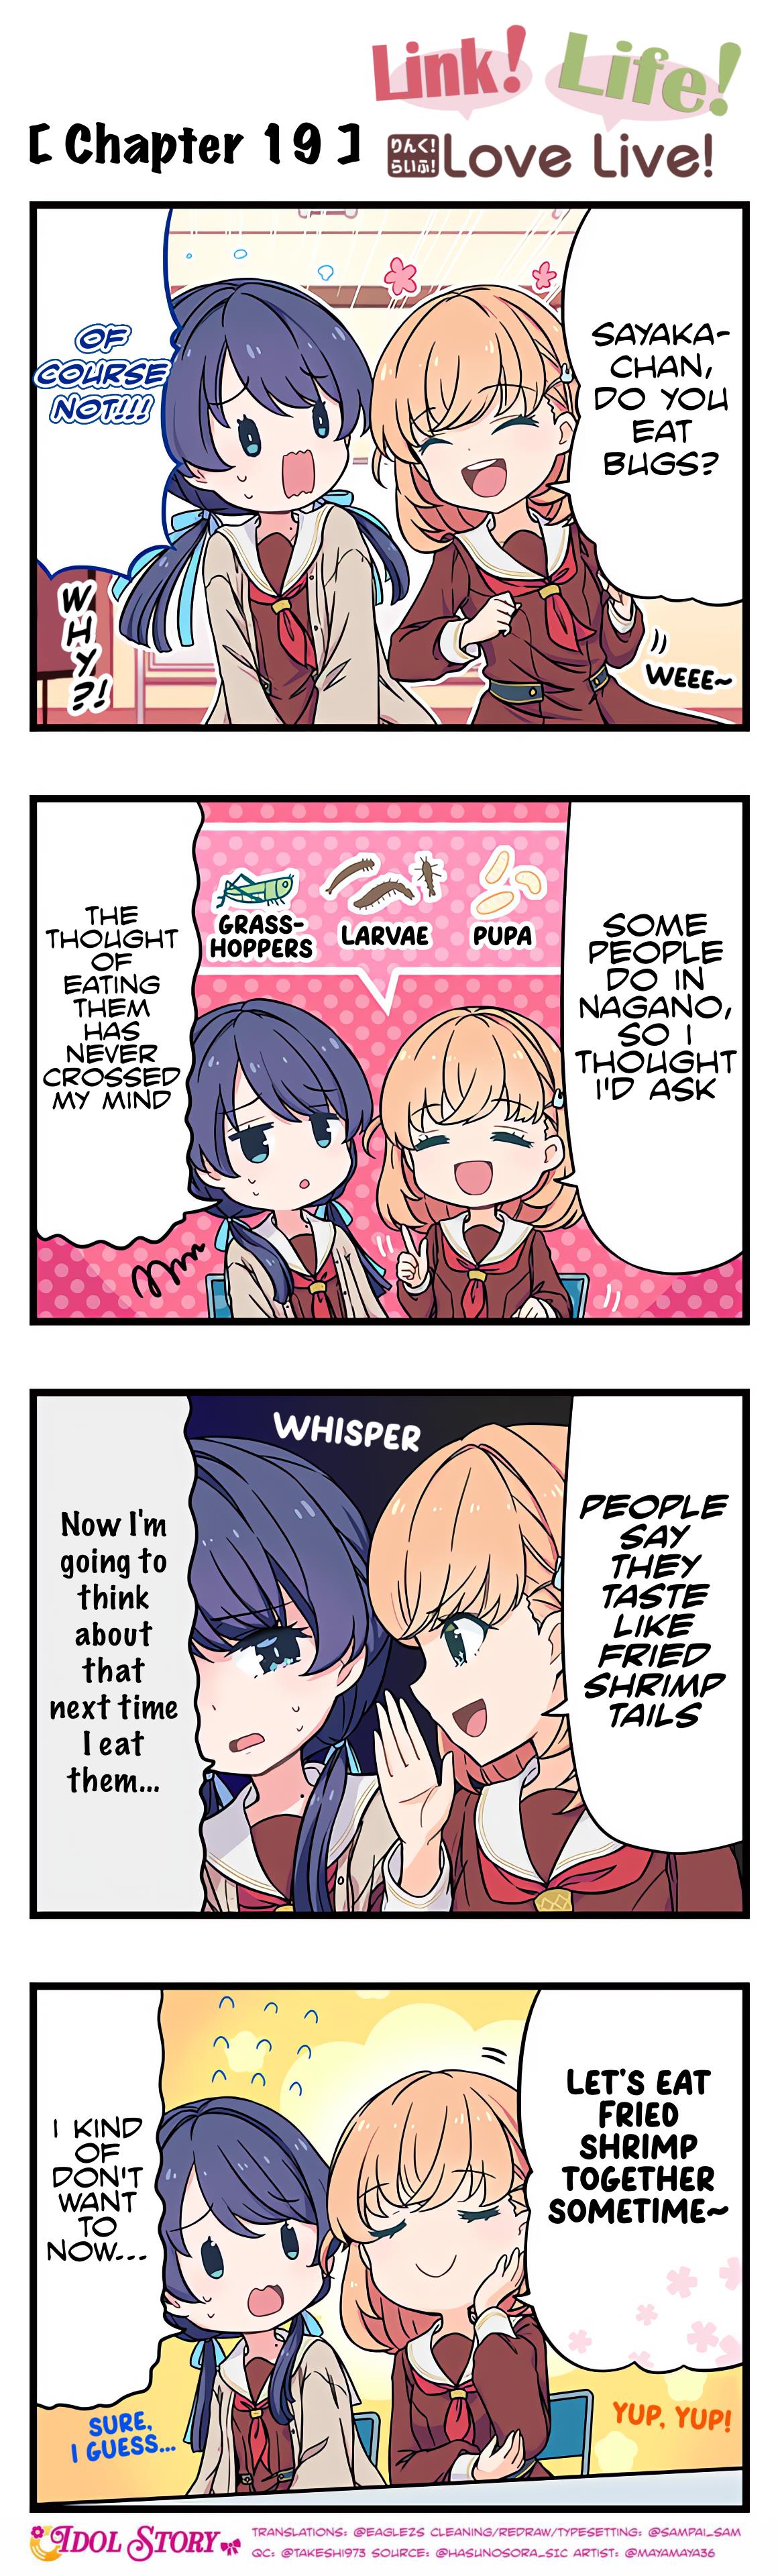 Link! Life! Love Live! Chapter 19 #1